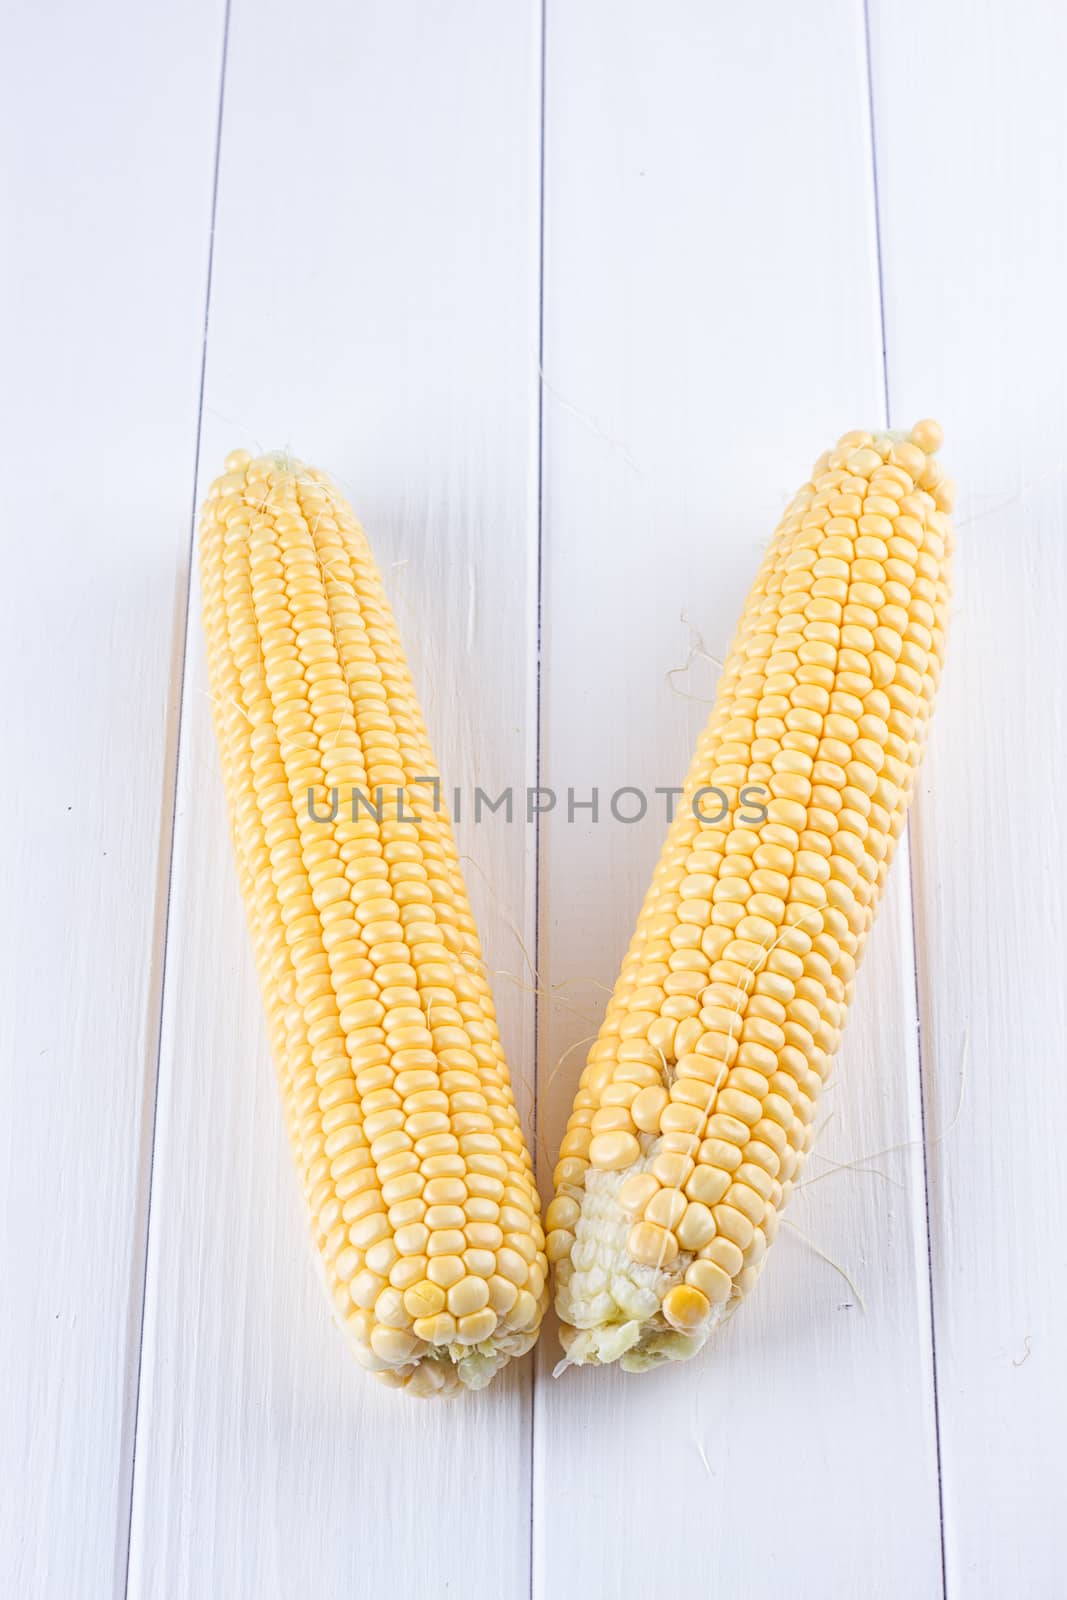 Two raw maize cobs by victosha